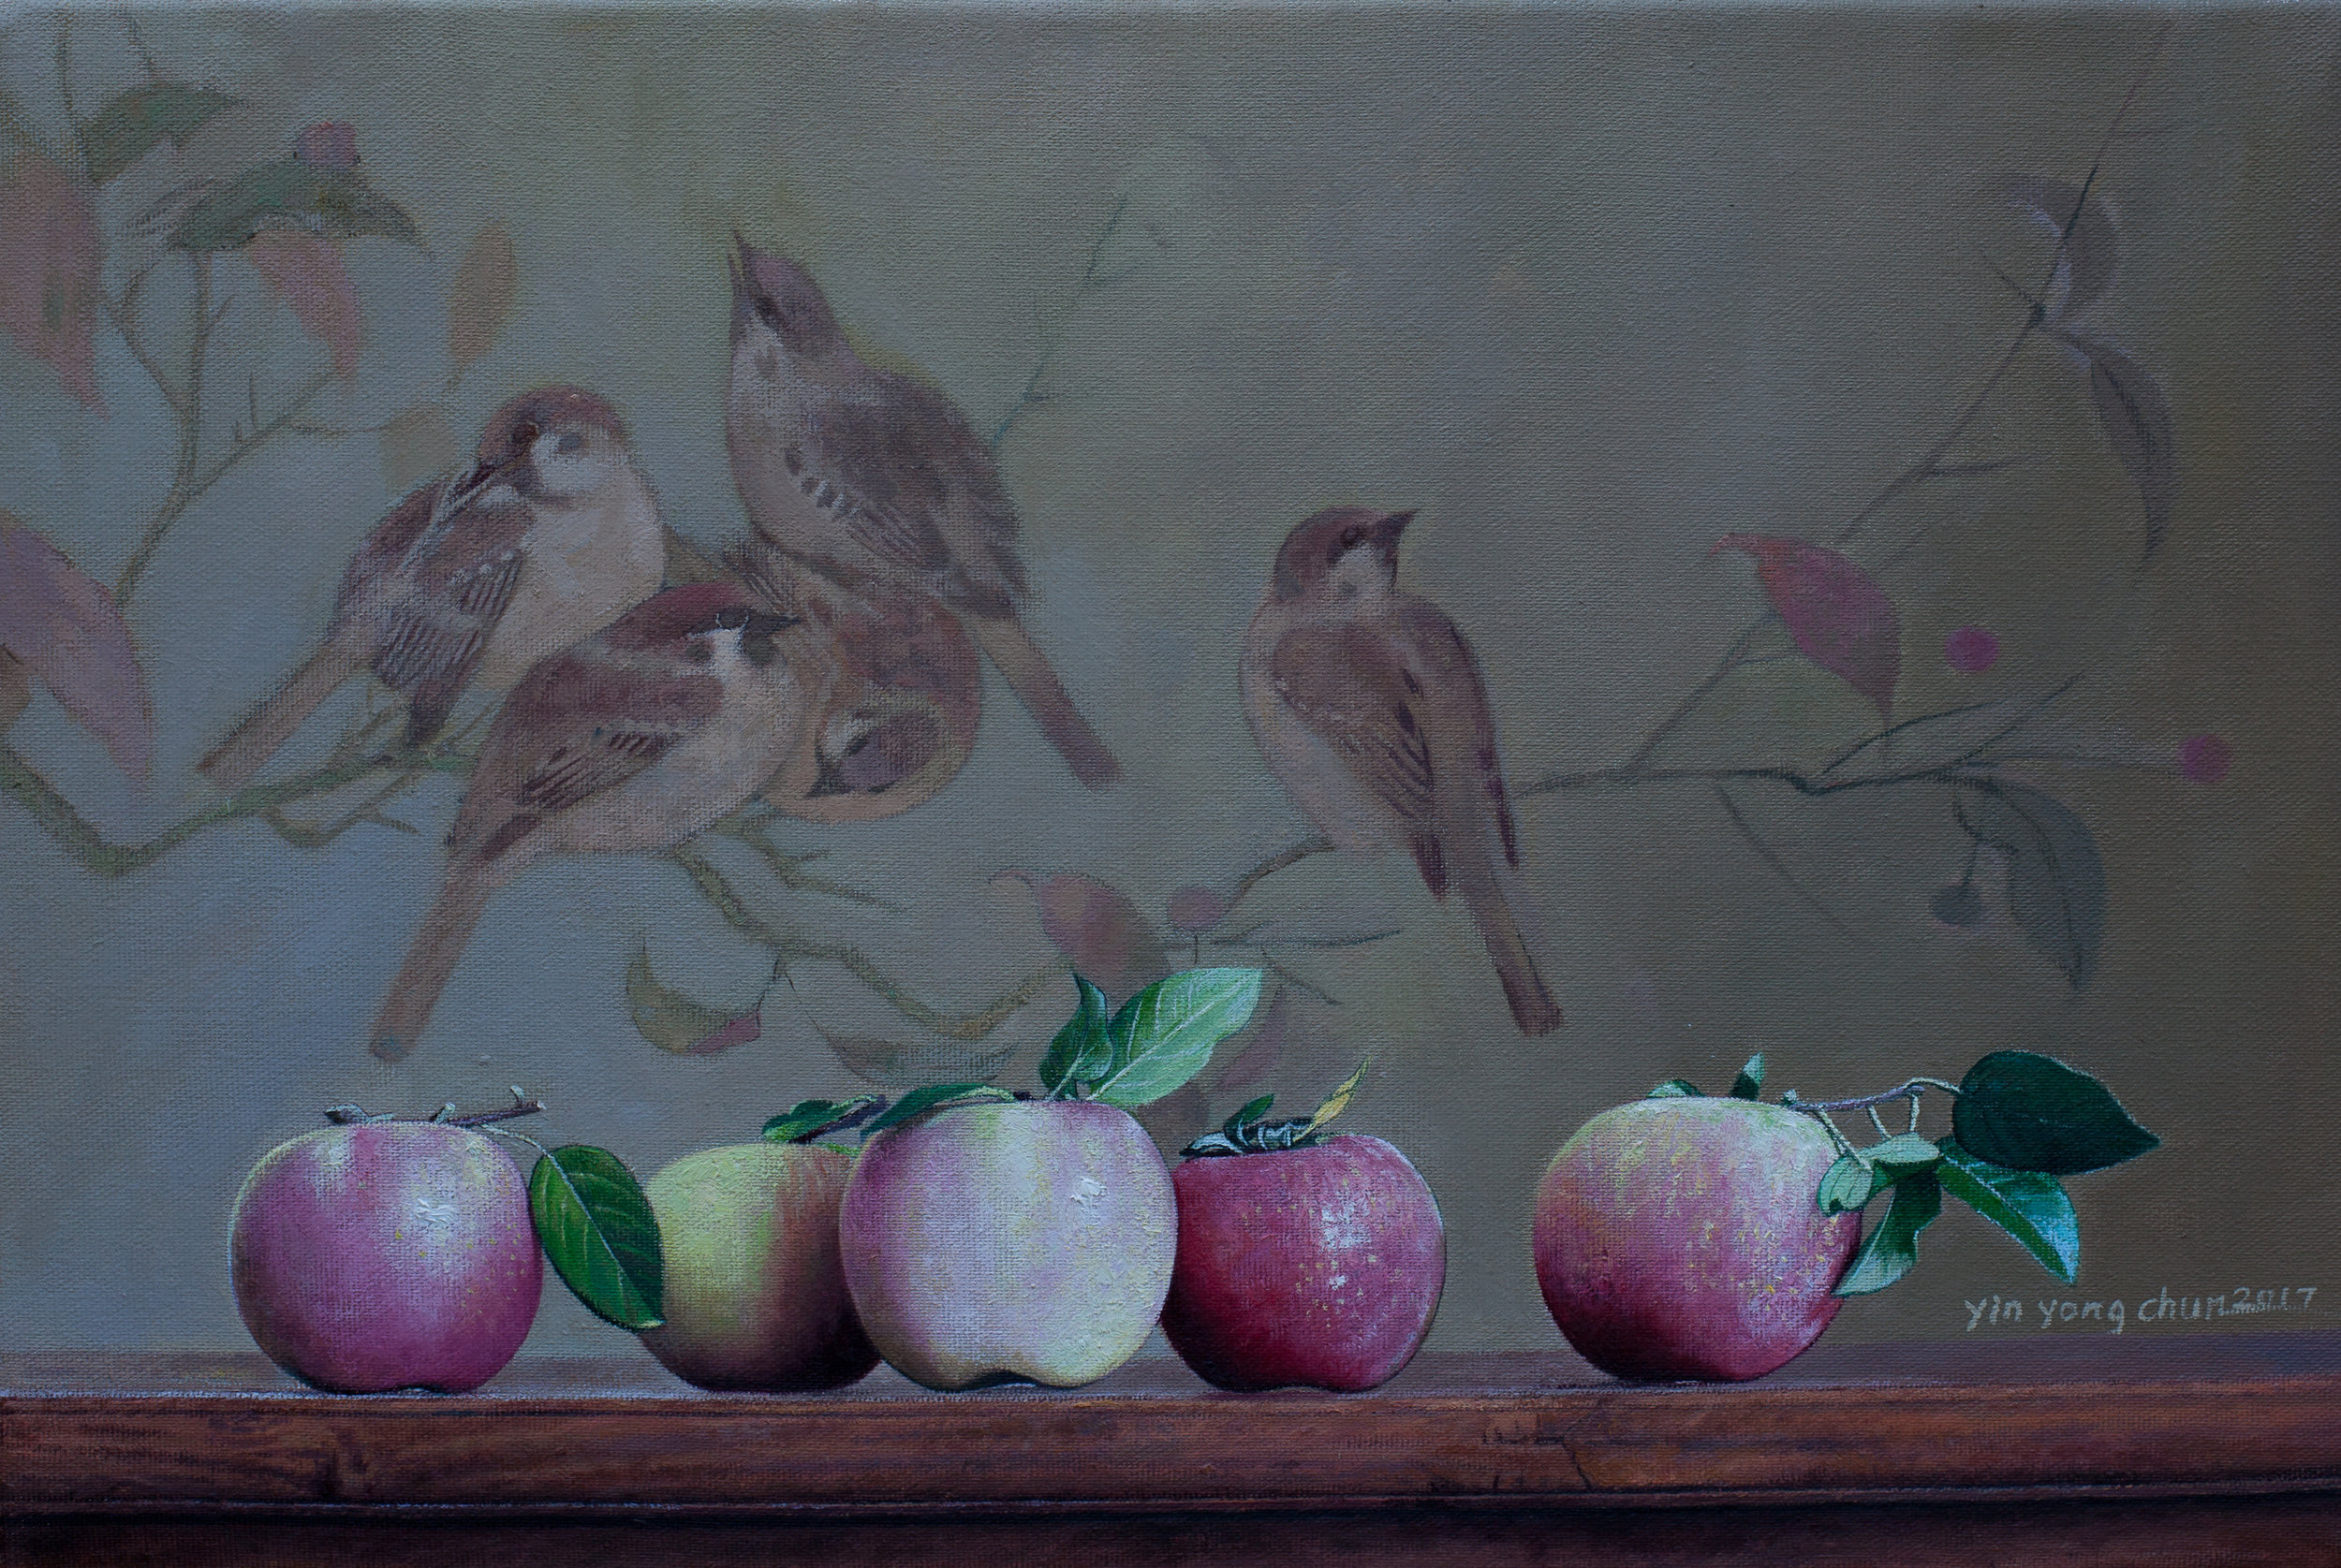  Apples and birds  18 x 12  2017 